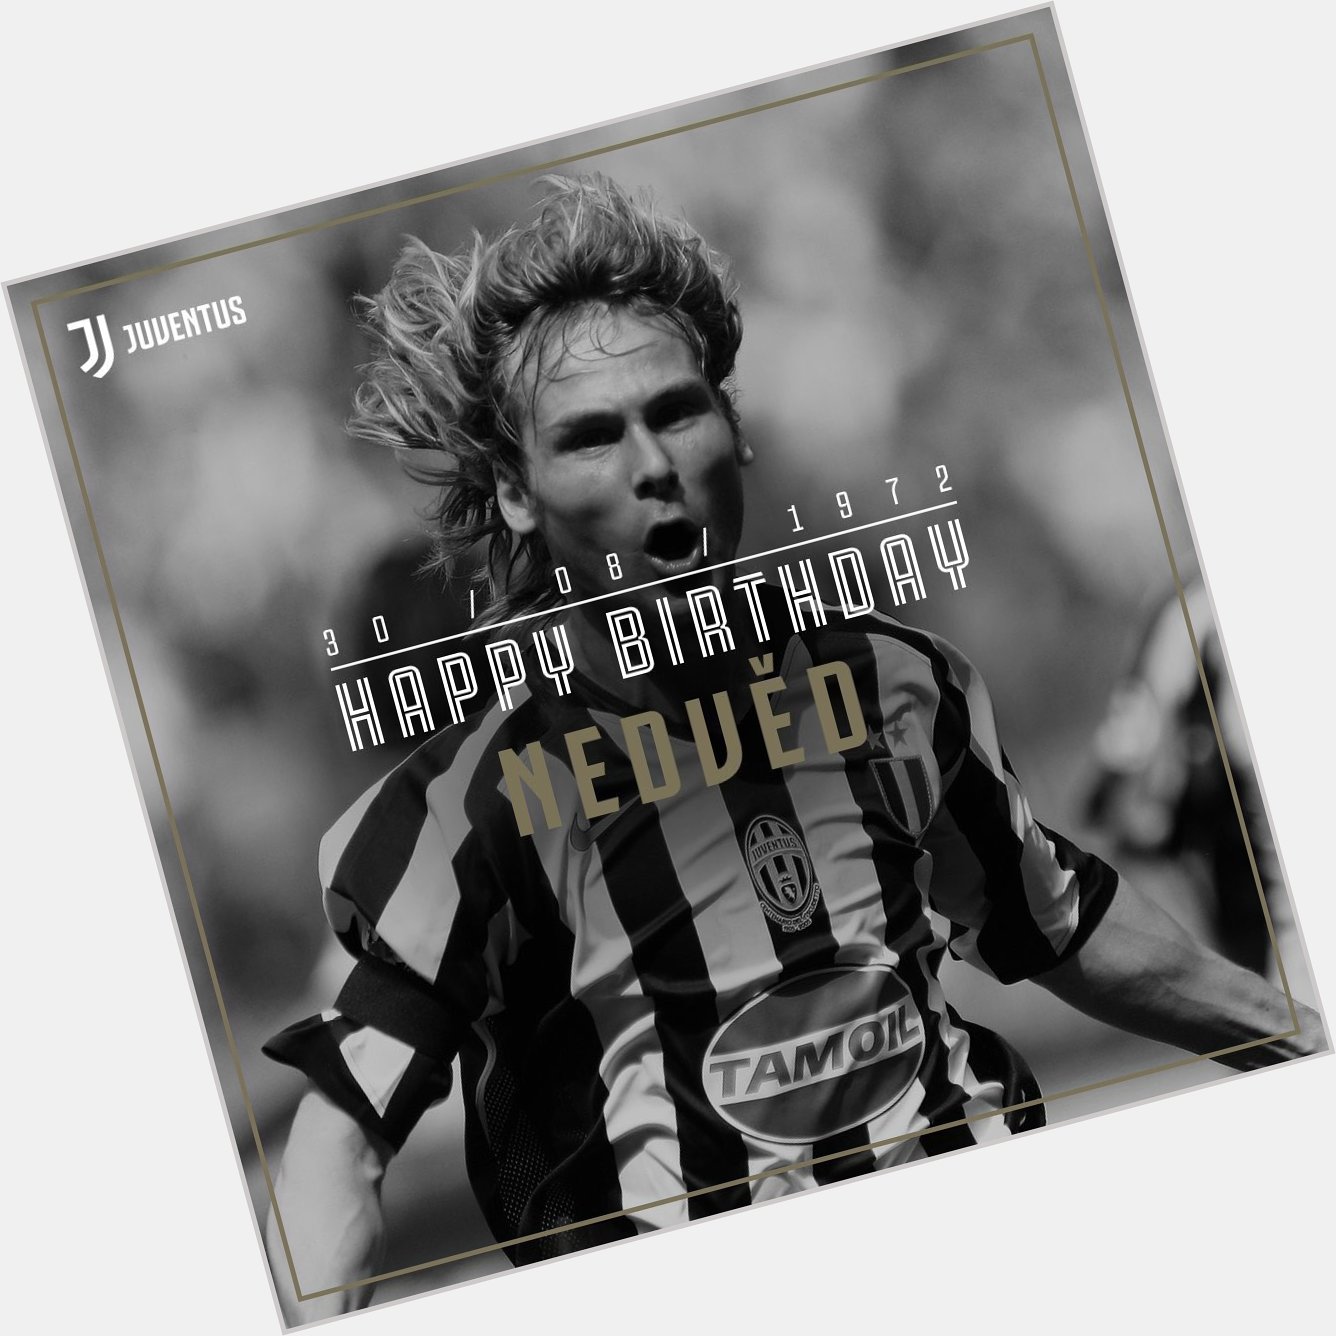 Happy Birthday to our vice president and Juventus legend, Pavel Nedved!  